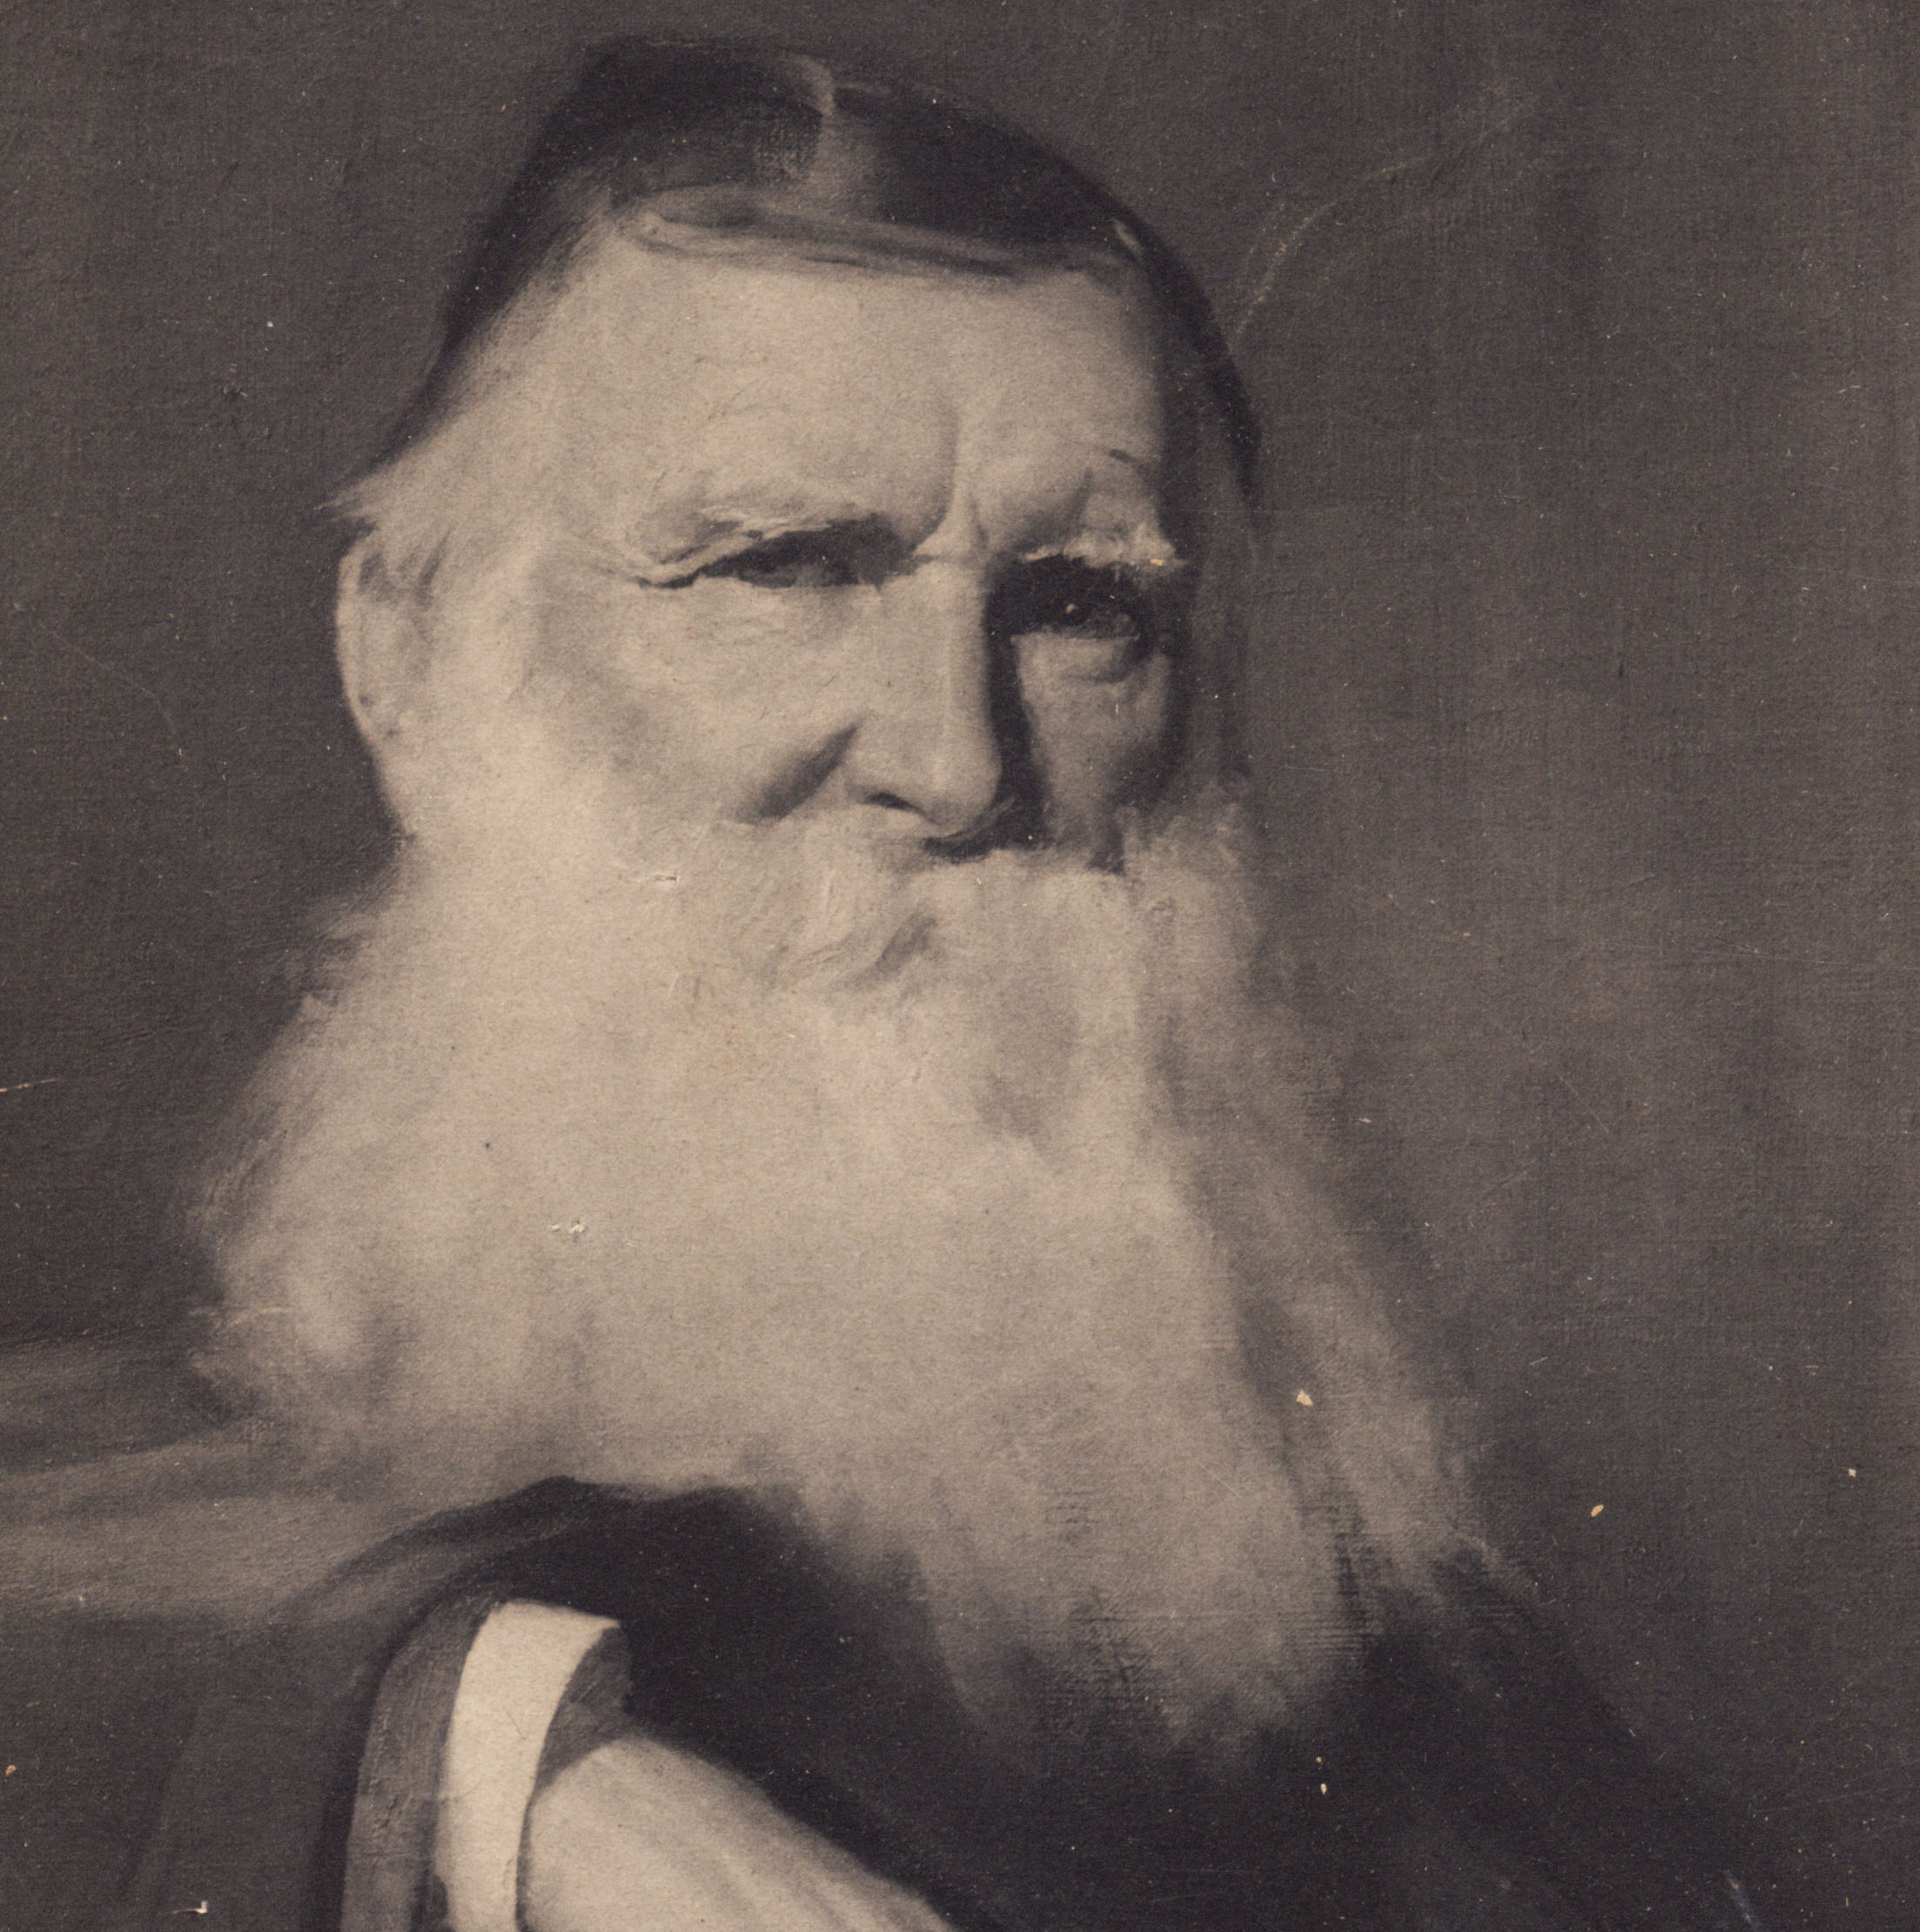 Philip Gidley King, c. late 1800s (169-43; K3759). 